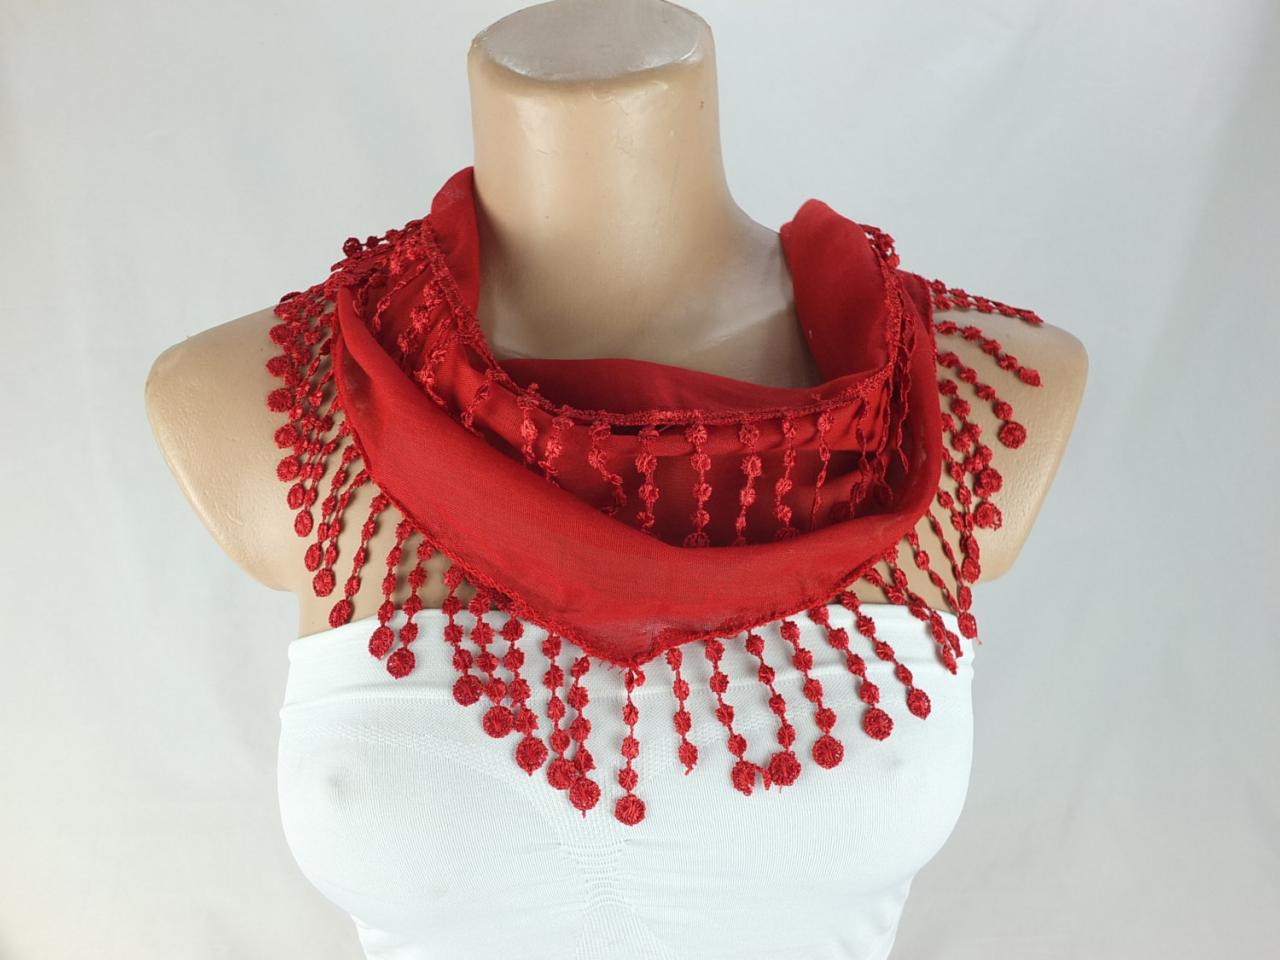 Dark Red Scarf, Cotton Scarf, Cowl With Polyester Trim, Cotton Neckwarmer, Scarf Necklace, Womens Foulard,scarflette, Christmast Gift